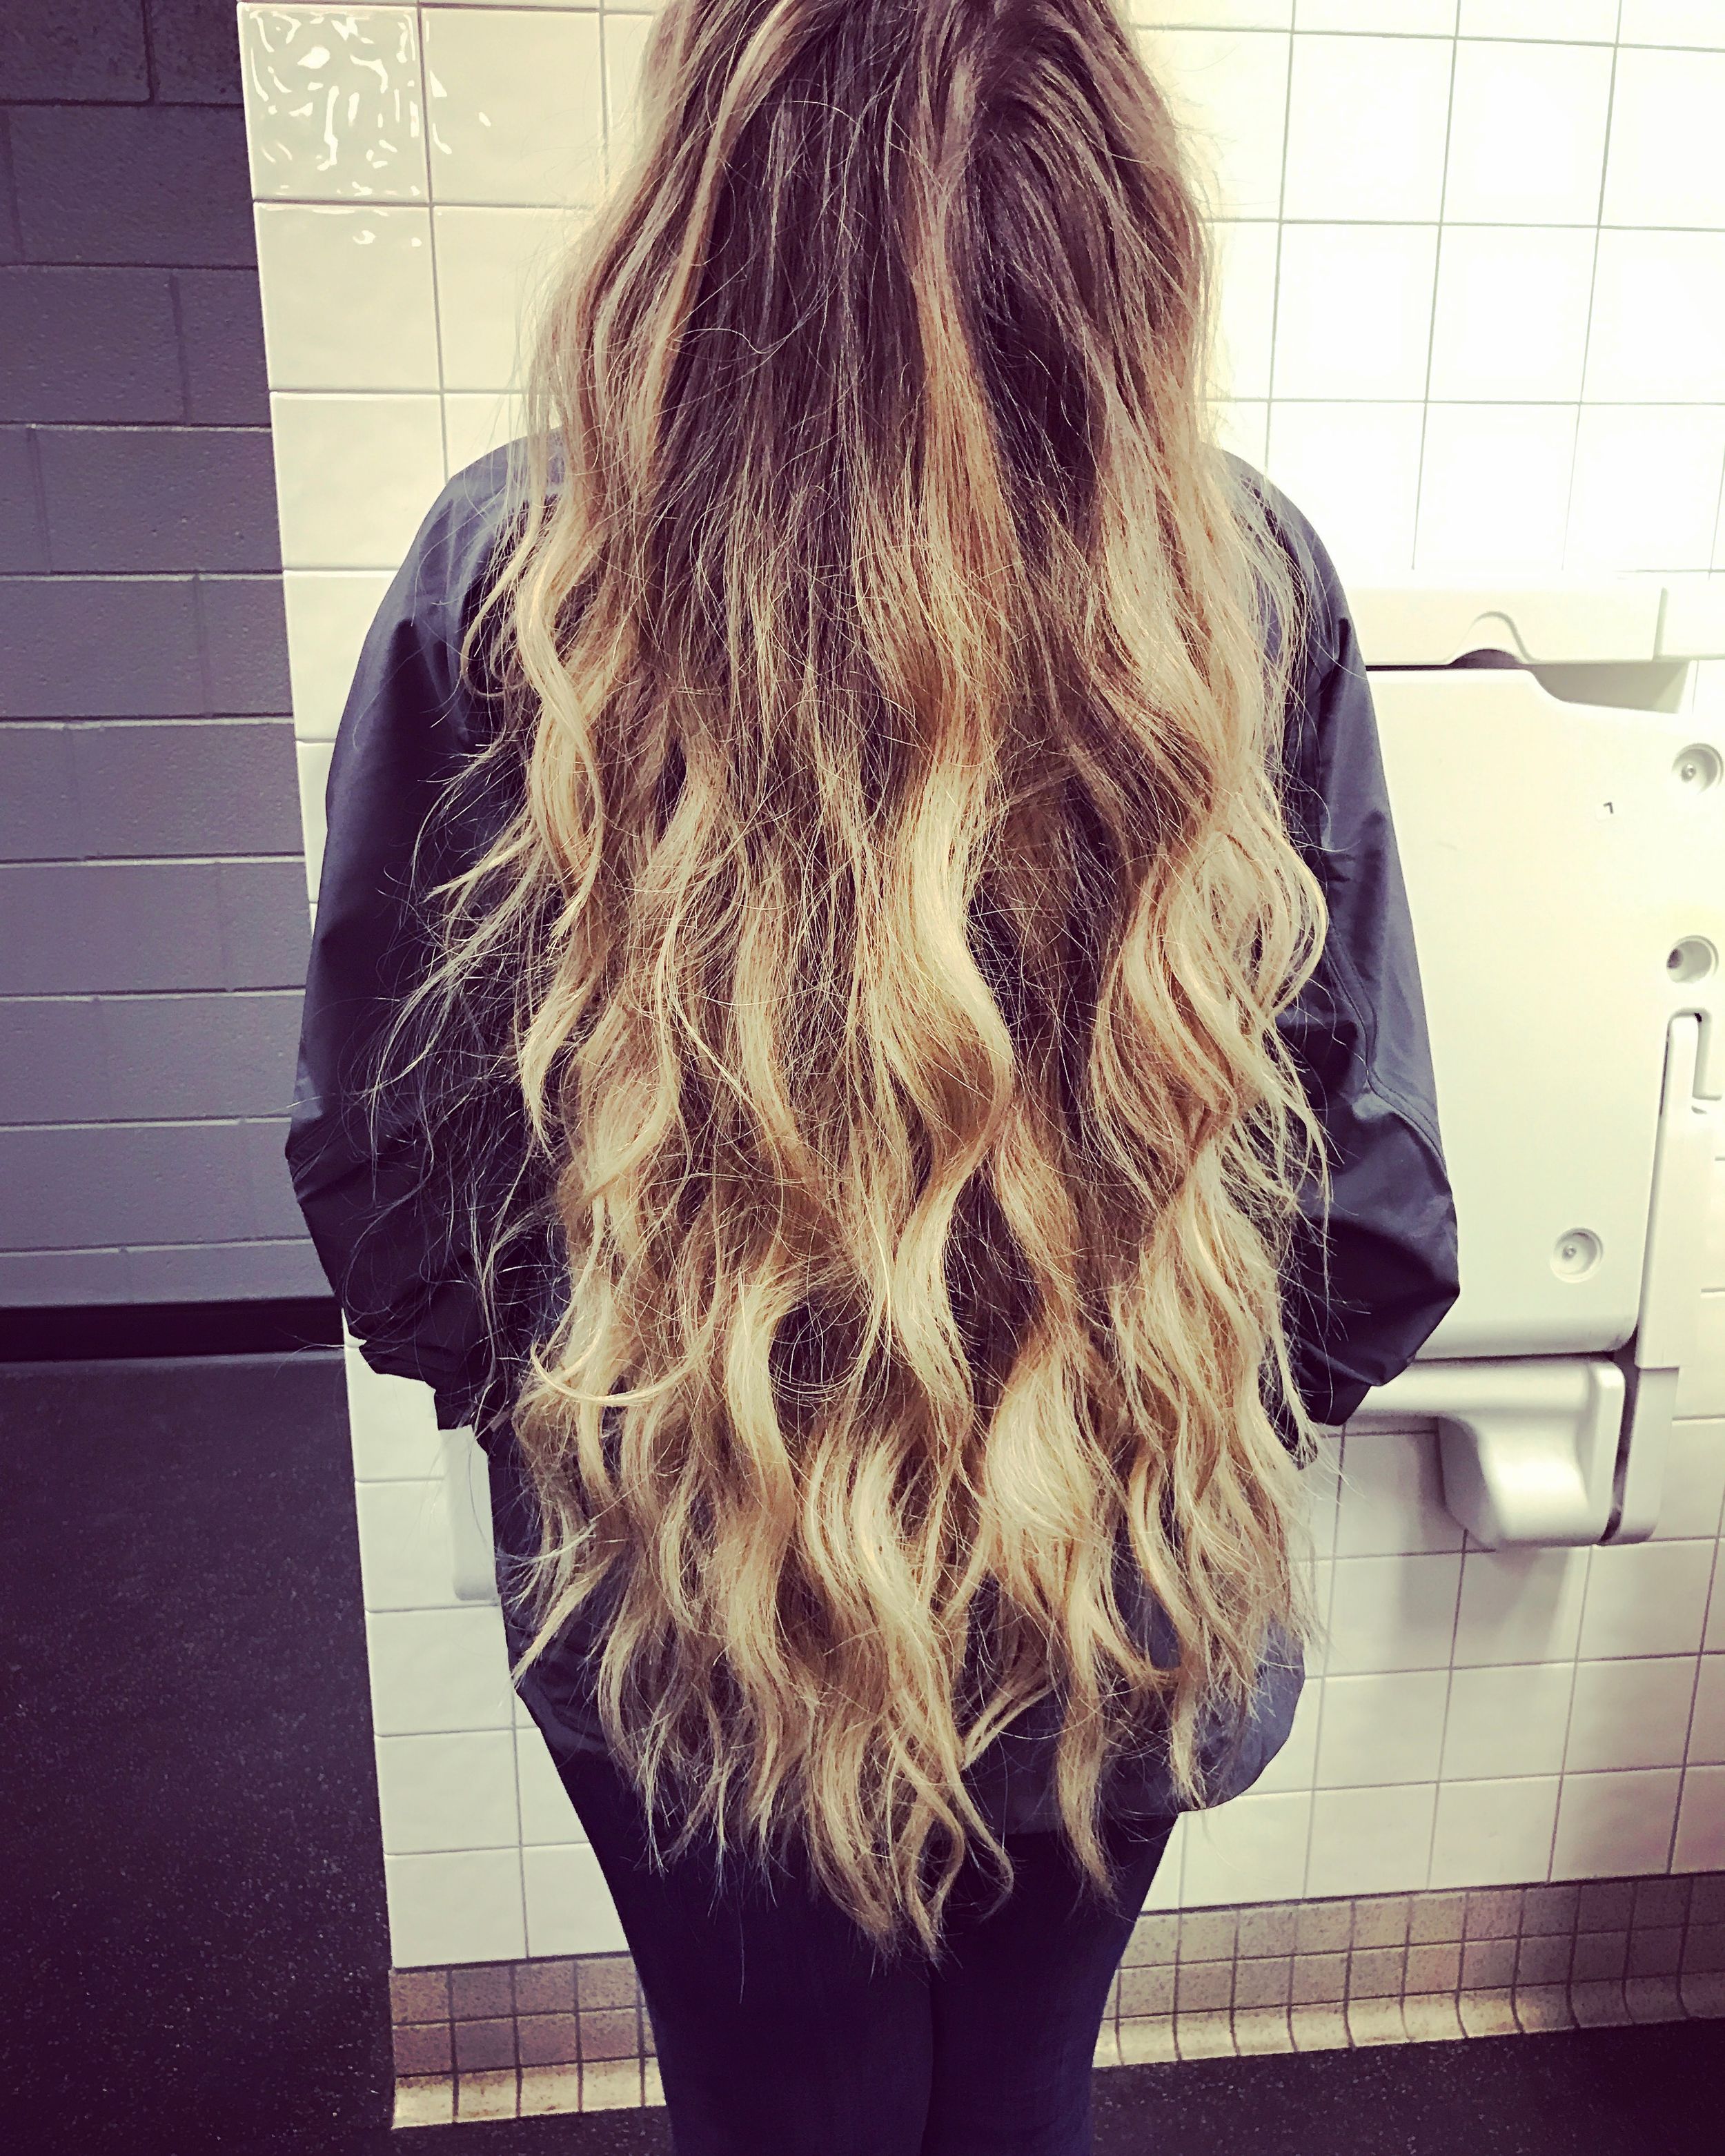 10 Struggles That Every Girl With Really Long Hair Knows To Be True